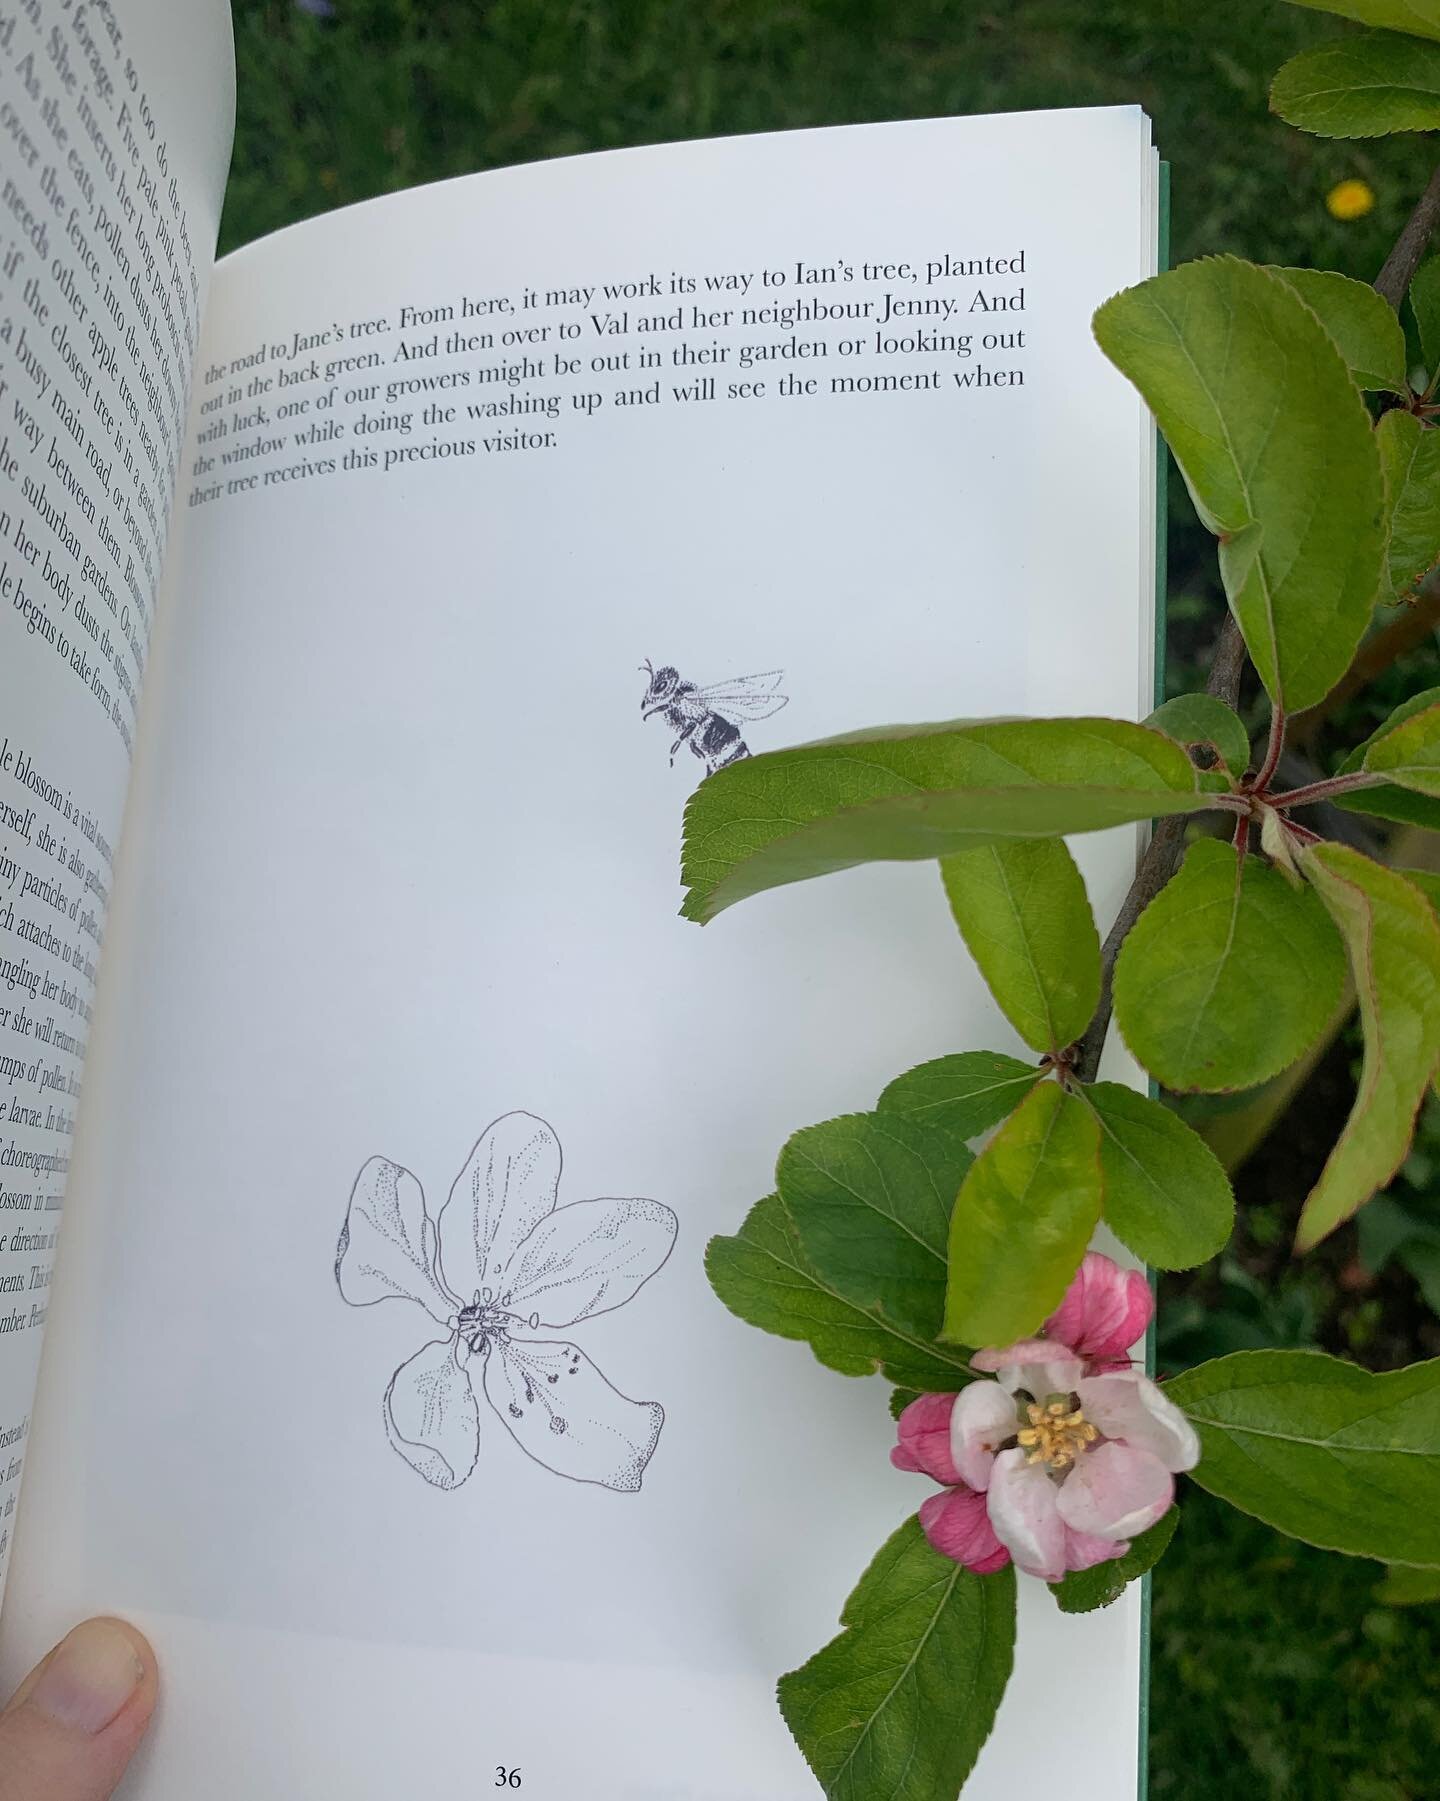 In celebration of Orchard Blossom Day, here are some blooms I&rsquo;ve enjoyed lately. 1. Blossom and bee from the @neighbouringorchard book (available to buy in the link in my bio). 
2. Pear blossom at Dunkeld and Birnam Community Orchard
3. Apple b